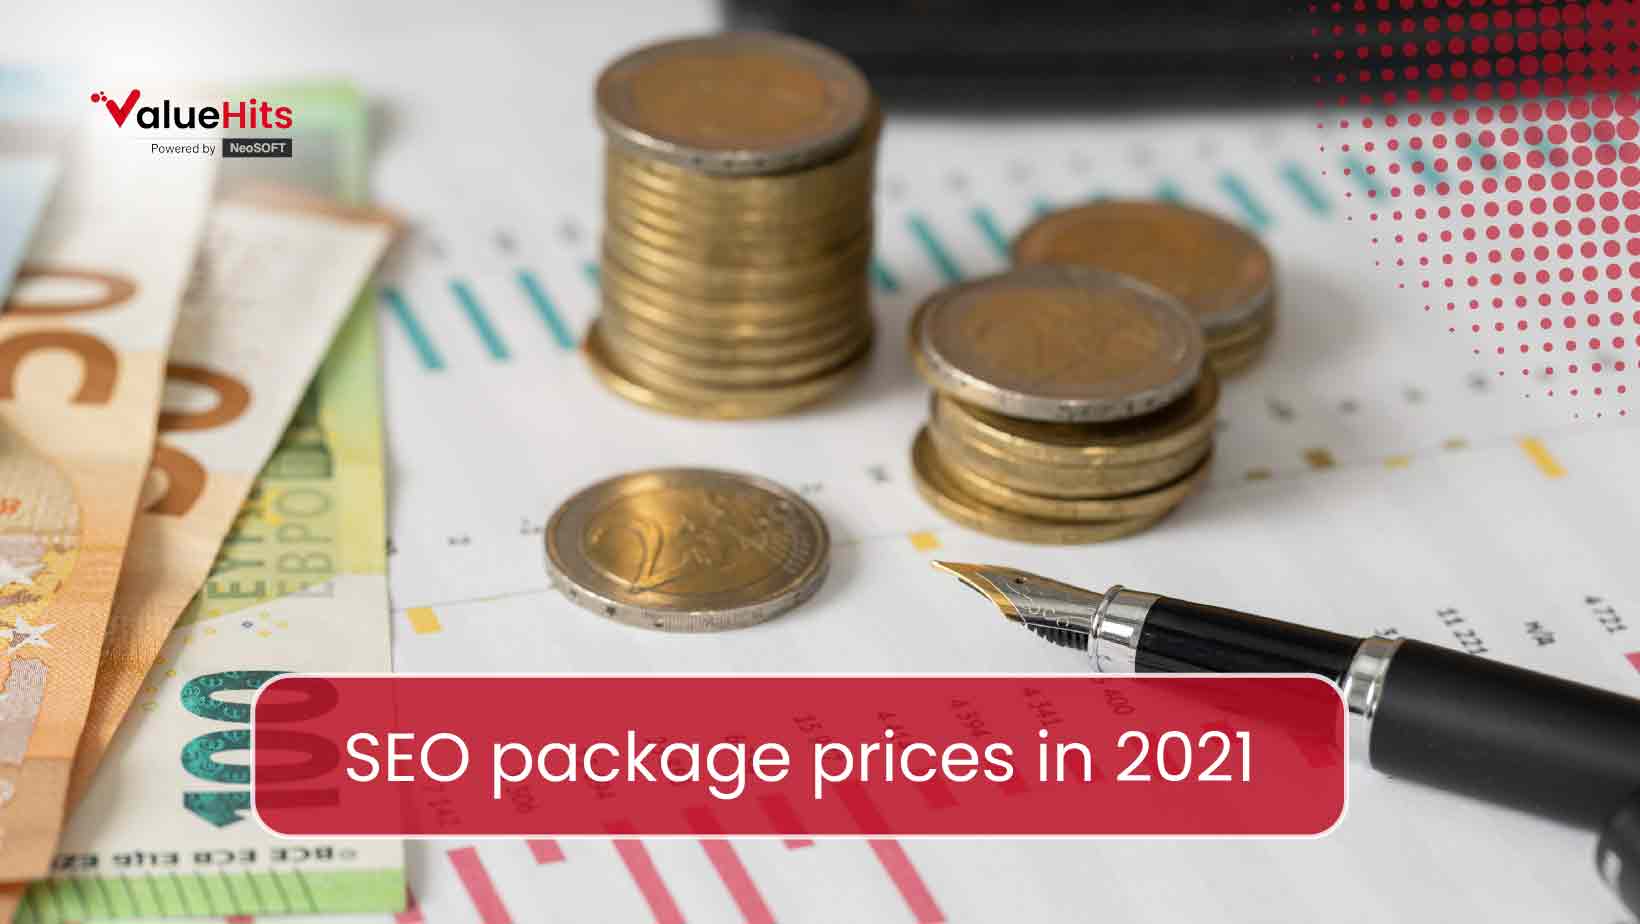 SEO package prices in 2021